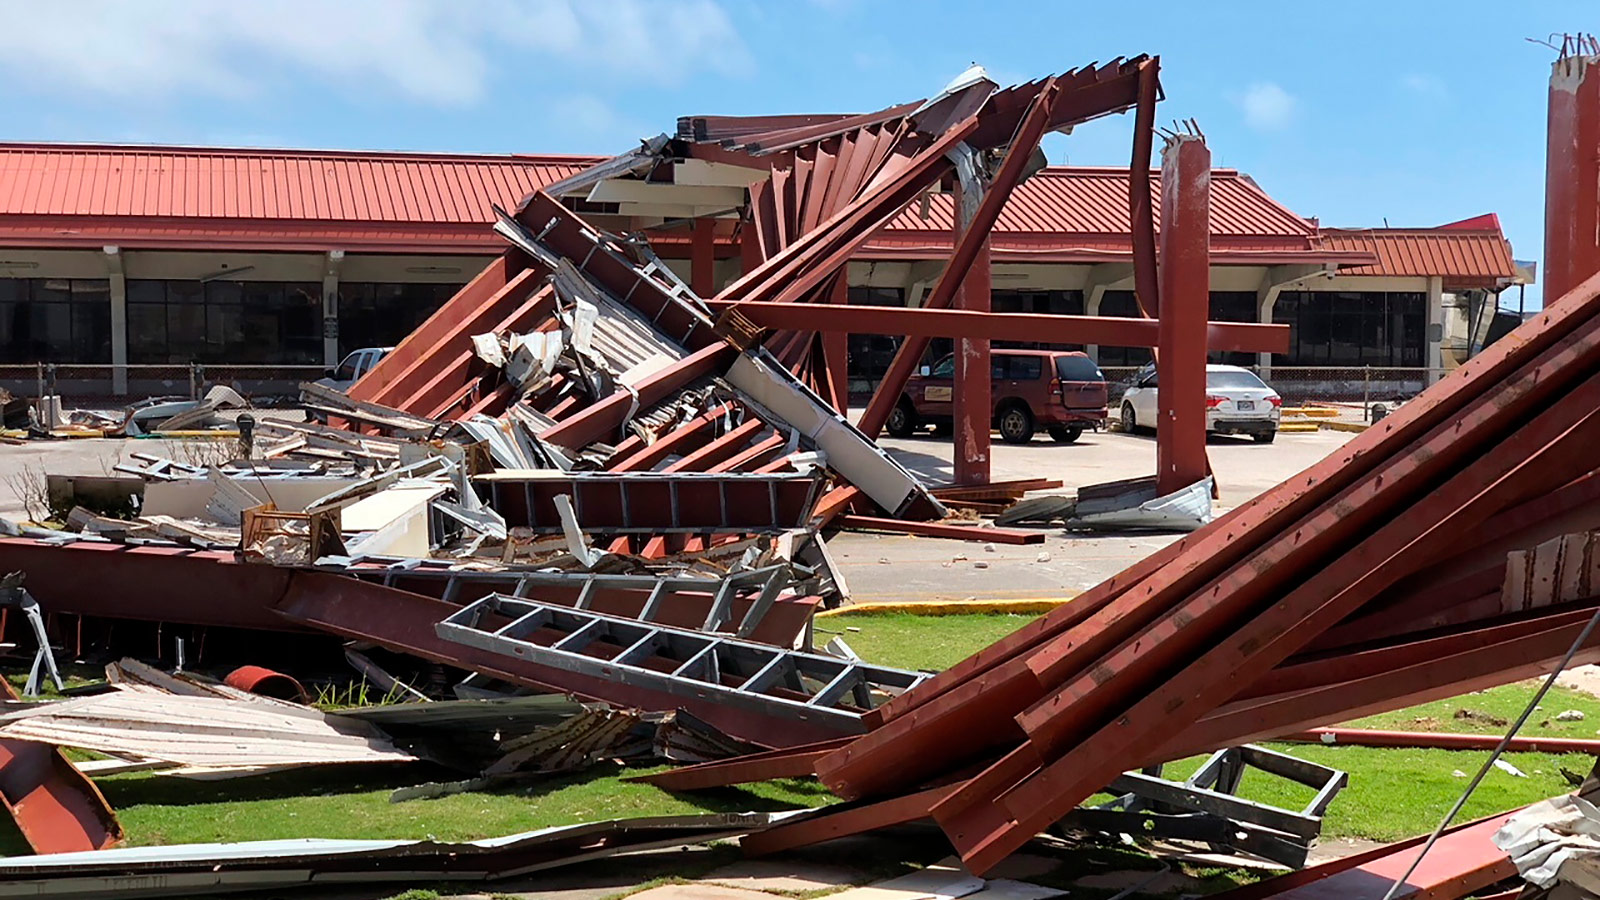 Damage at Saipan's airport is shown after Super Typhoon Yutu hit the U.S. Commonwealth of the Northern Mariana Islands, Friday, Oct. 26, 2018, in Garapan, Saipan.